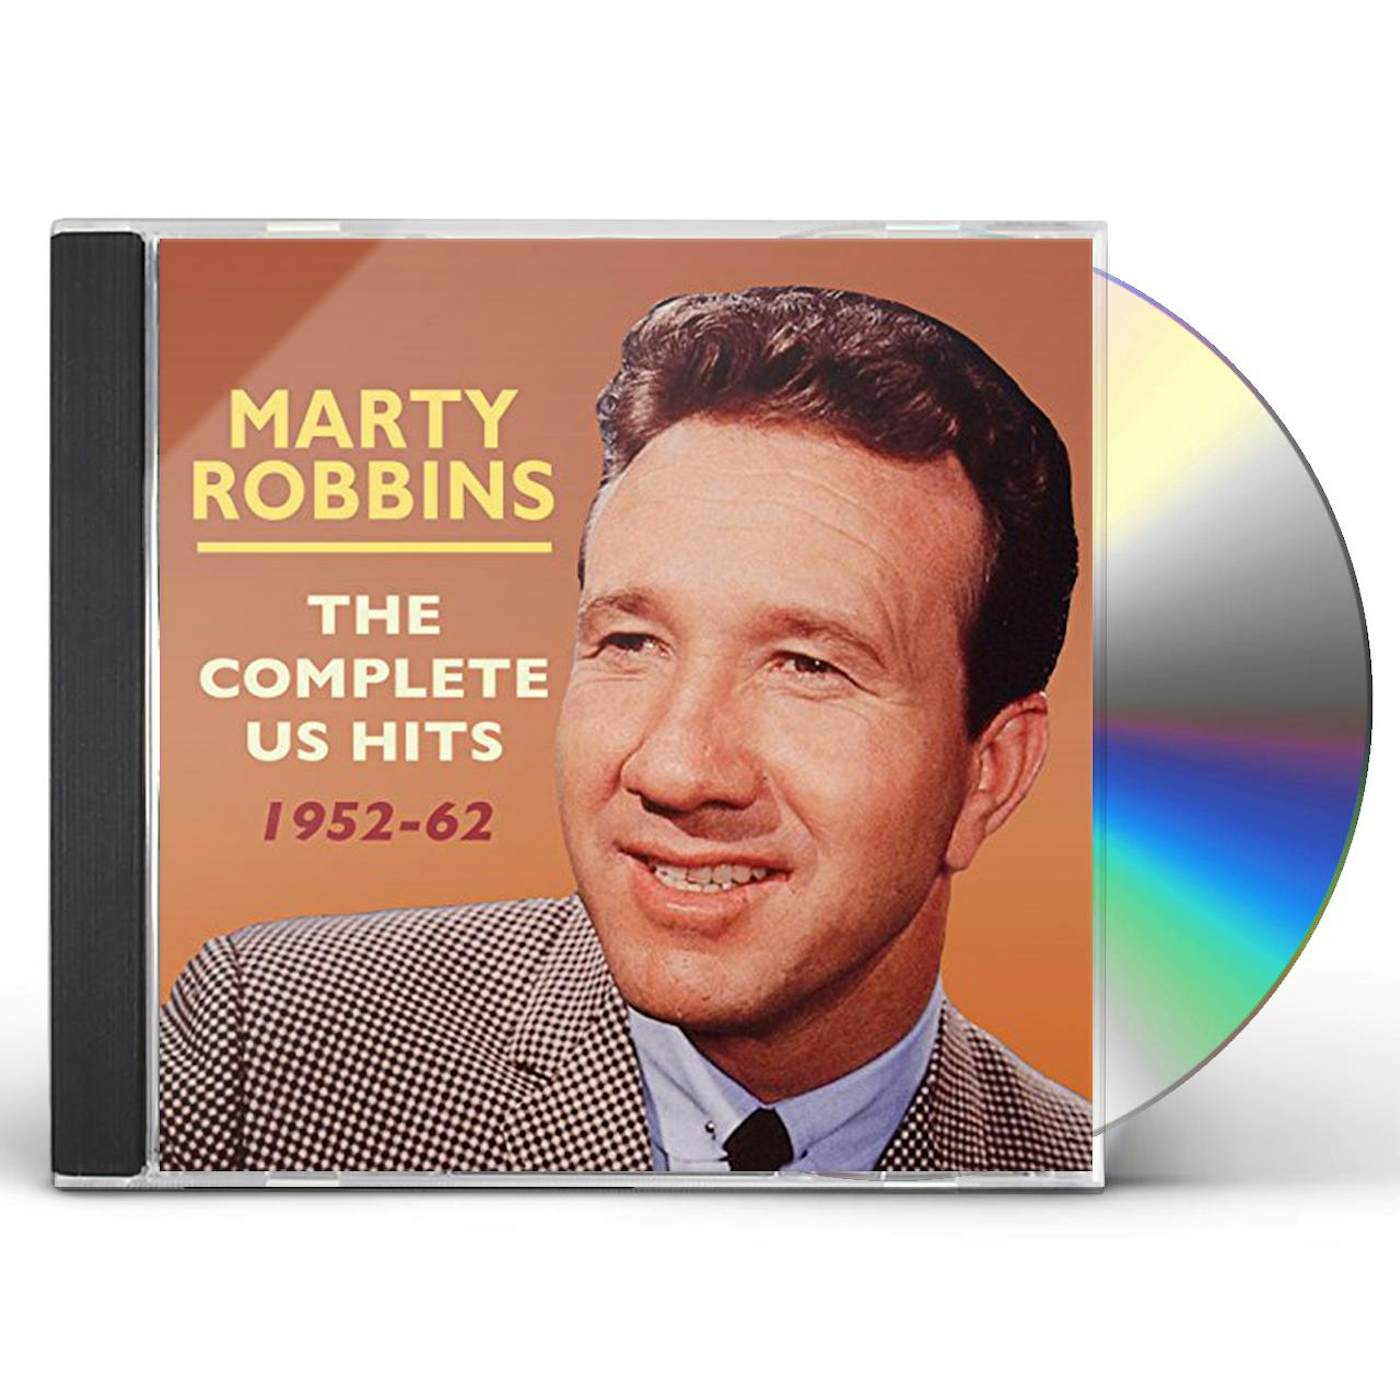 Marty Robbins COMPLETE US HITS 1952-62 CD